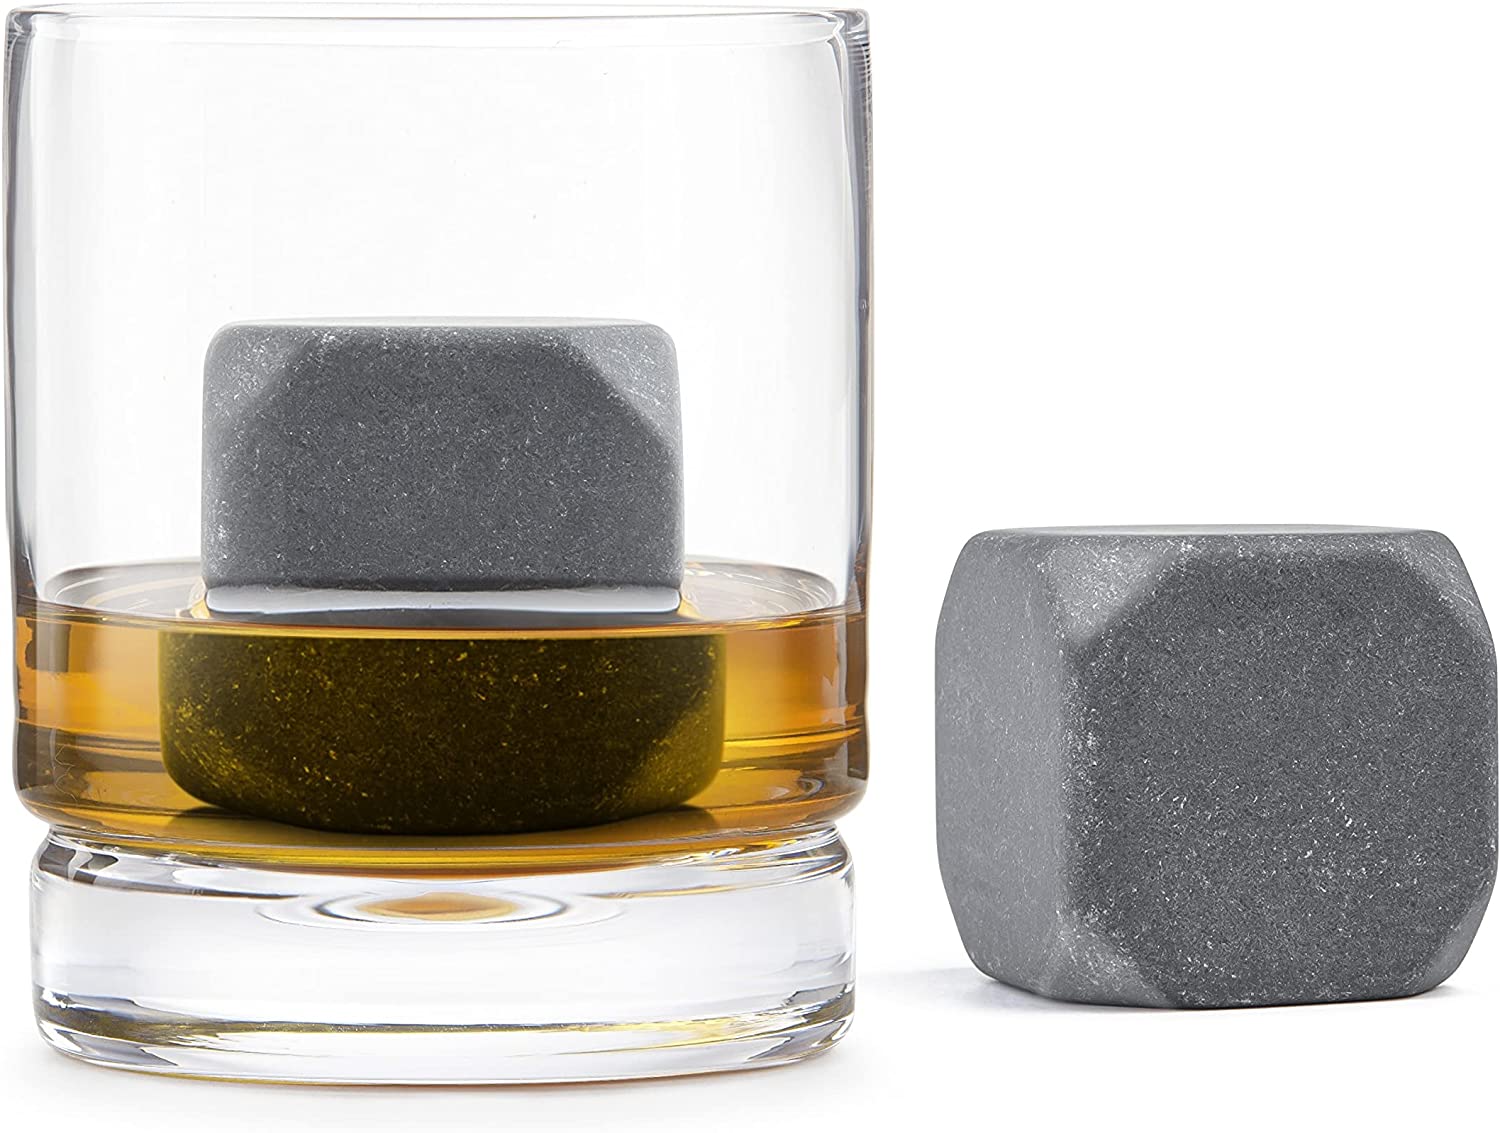 one sculpted chilling stone in a glass with liquid and one sitting beside it on a white background